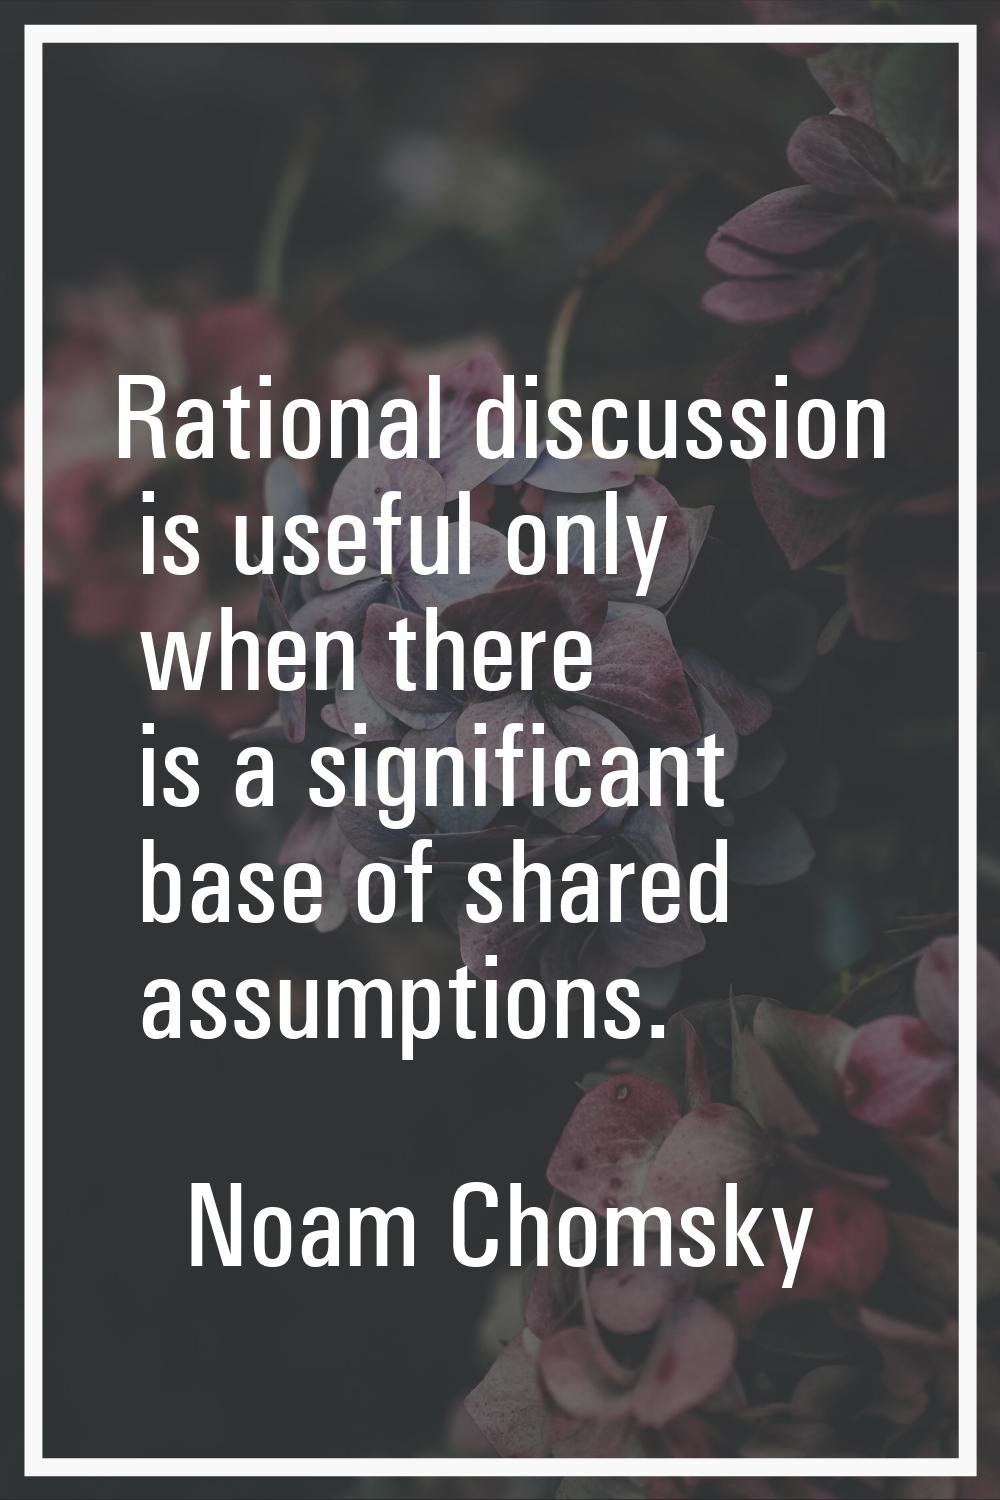 Rational discussion is useful only when there is a significant base of shared assumptions.